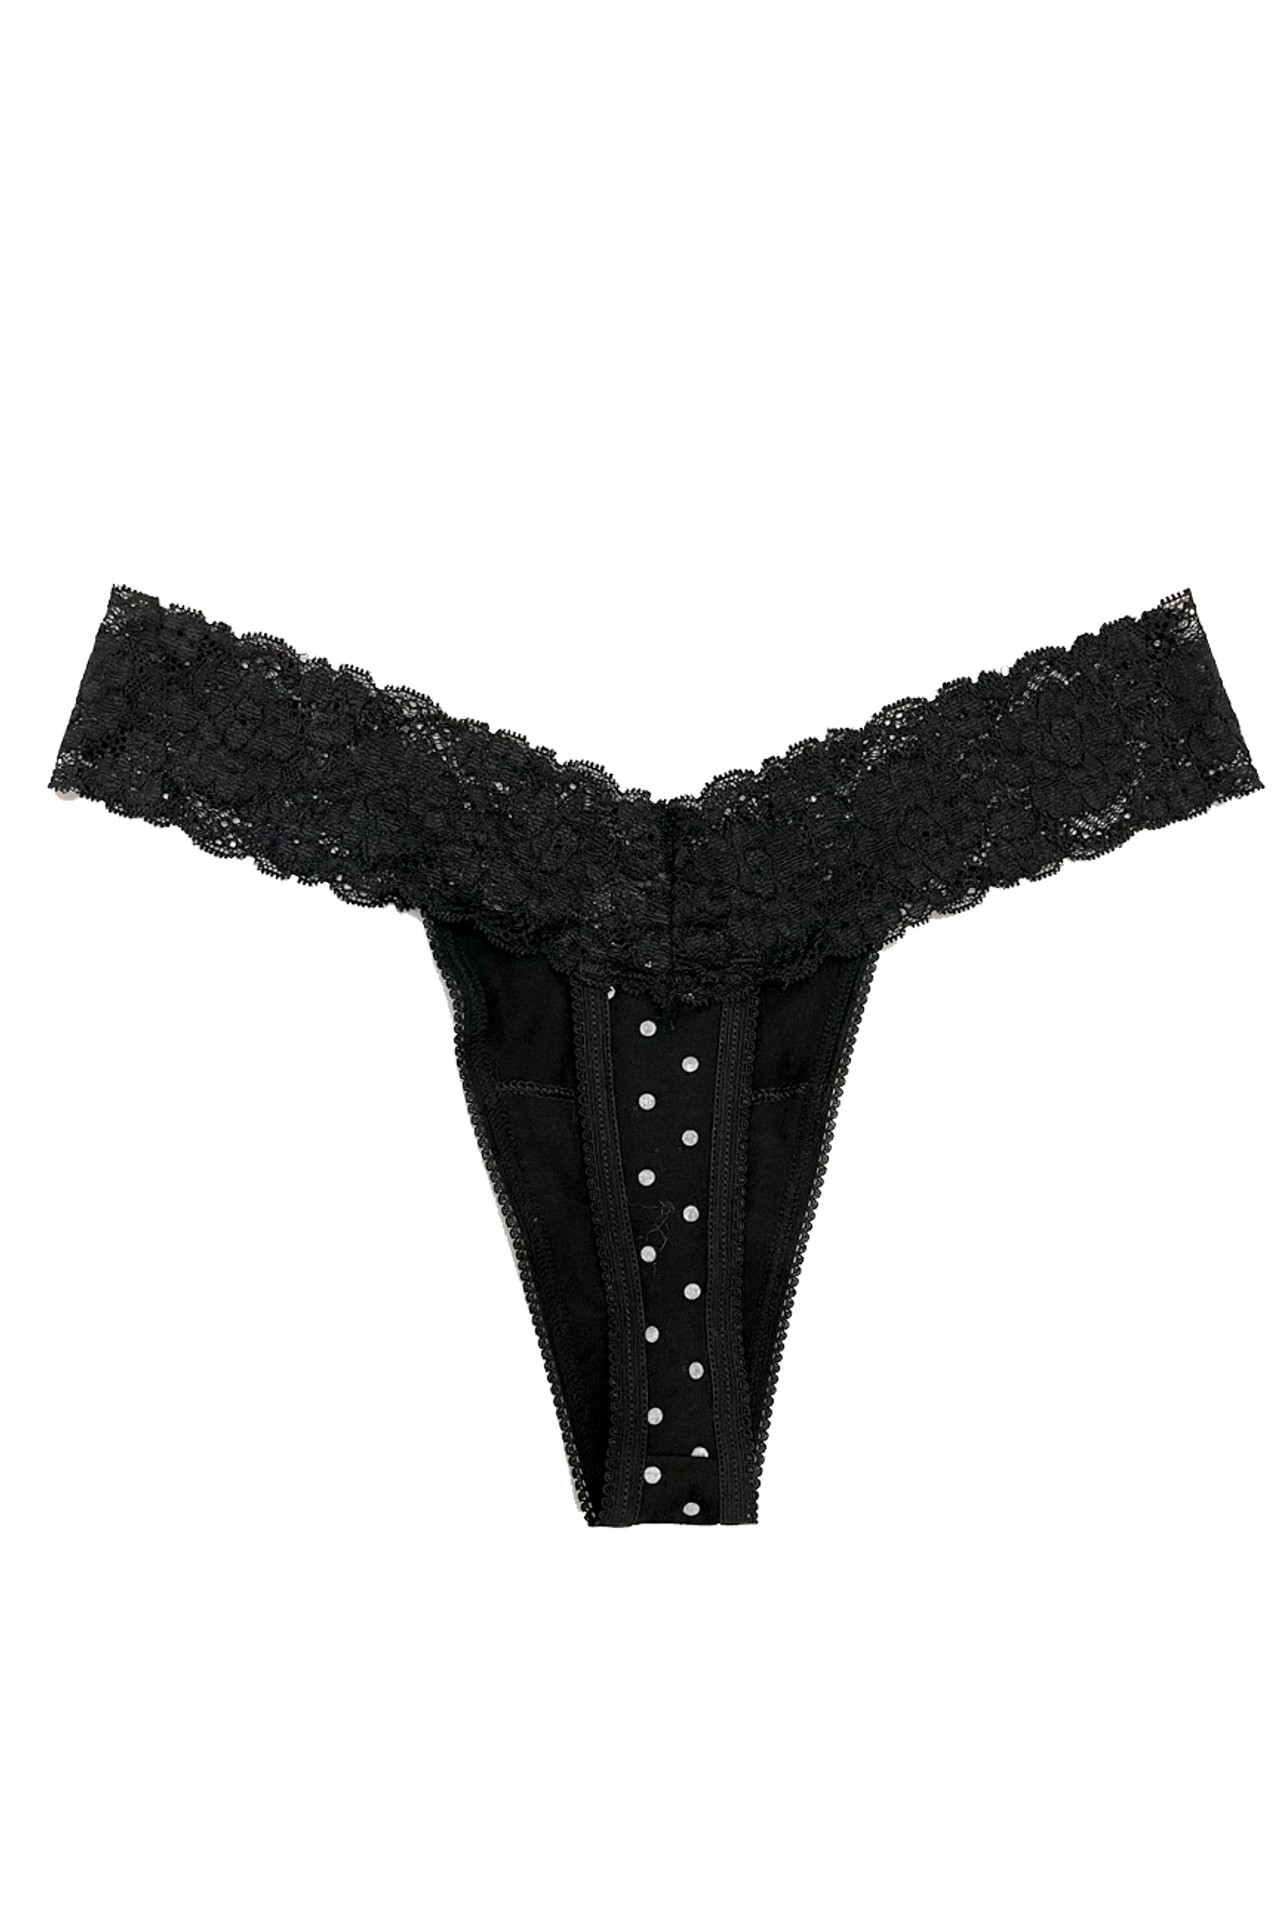 2 Pack Leopard and Polkadot Black Lace Cotton Thong Panty